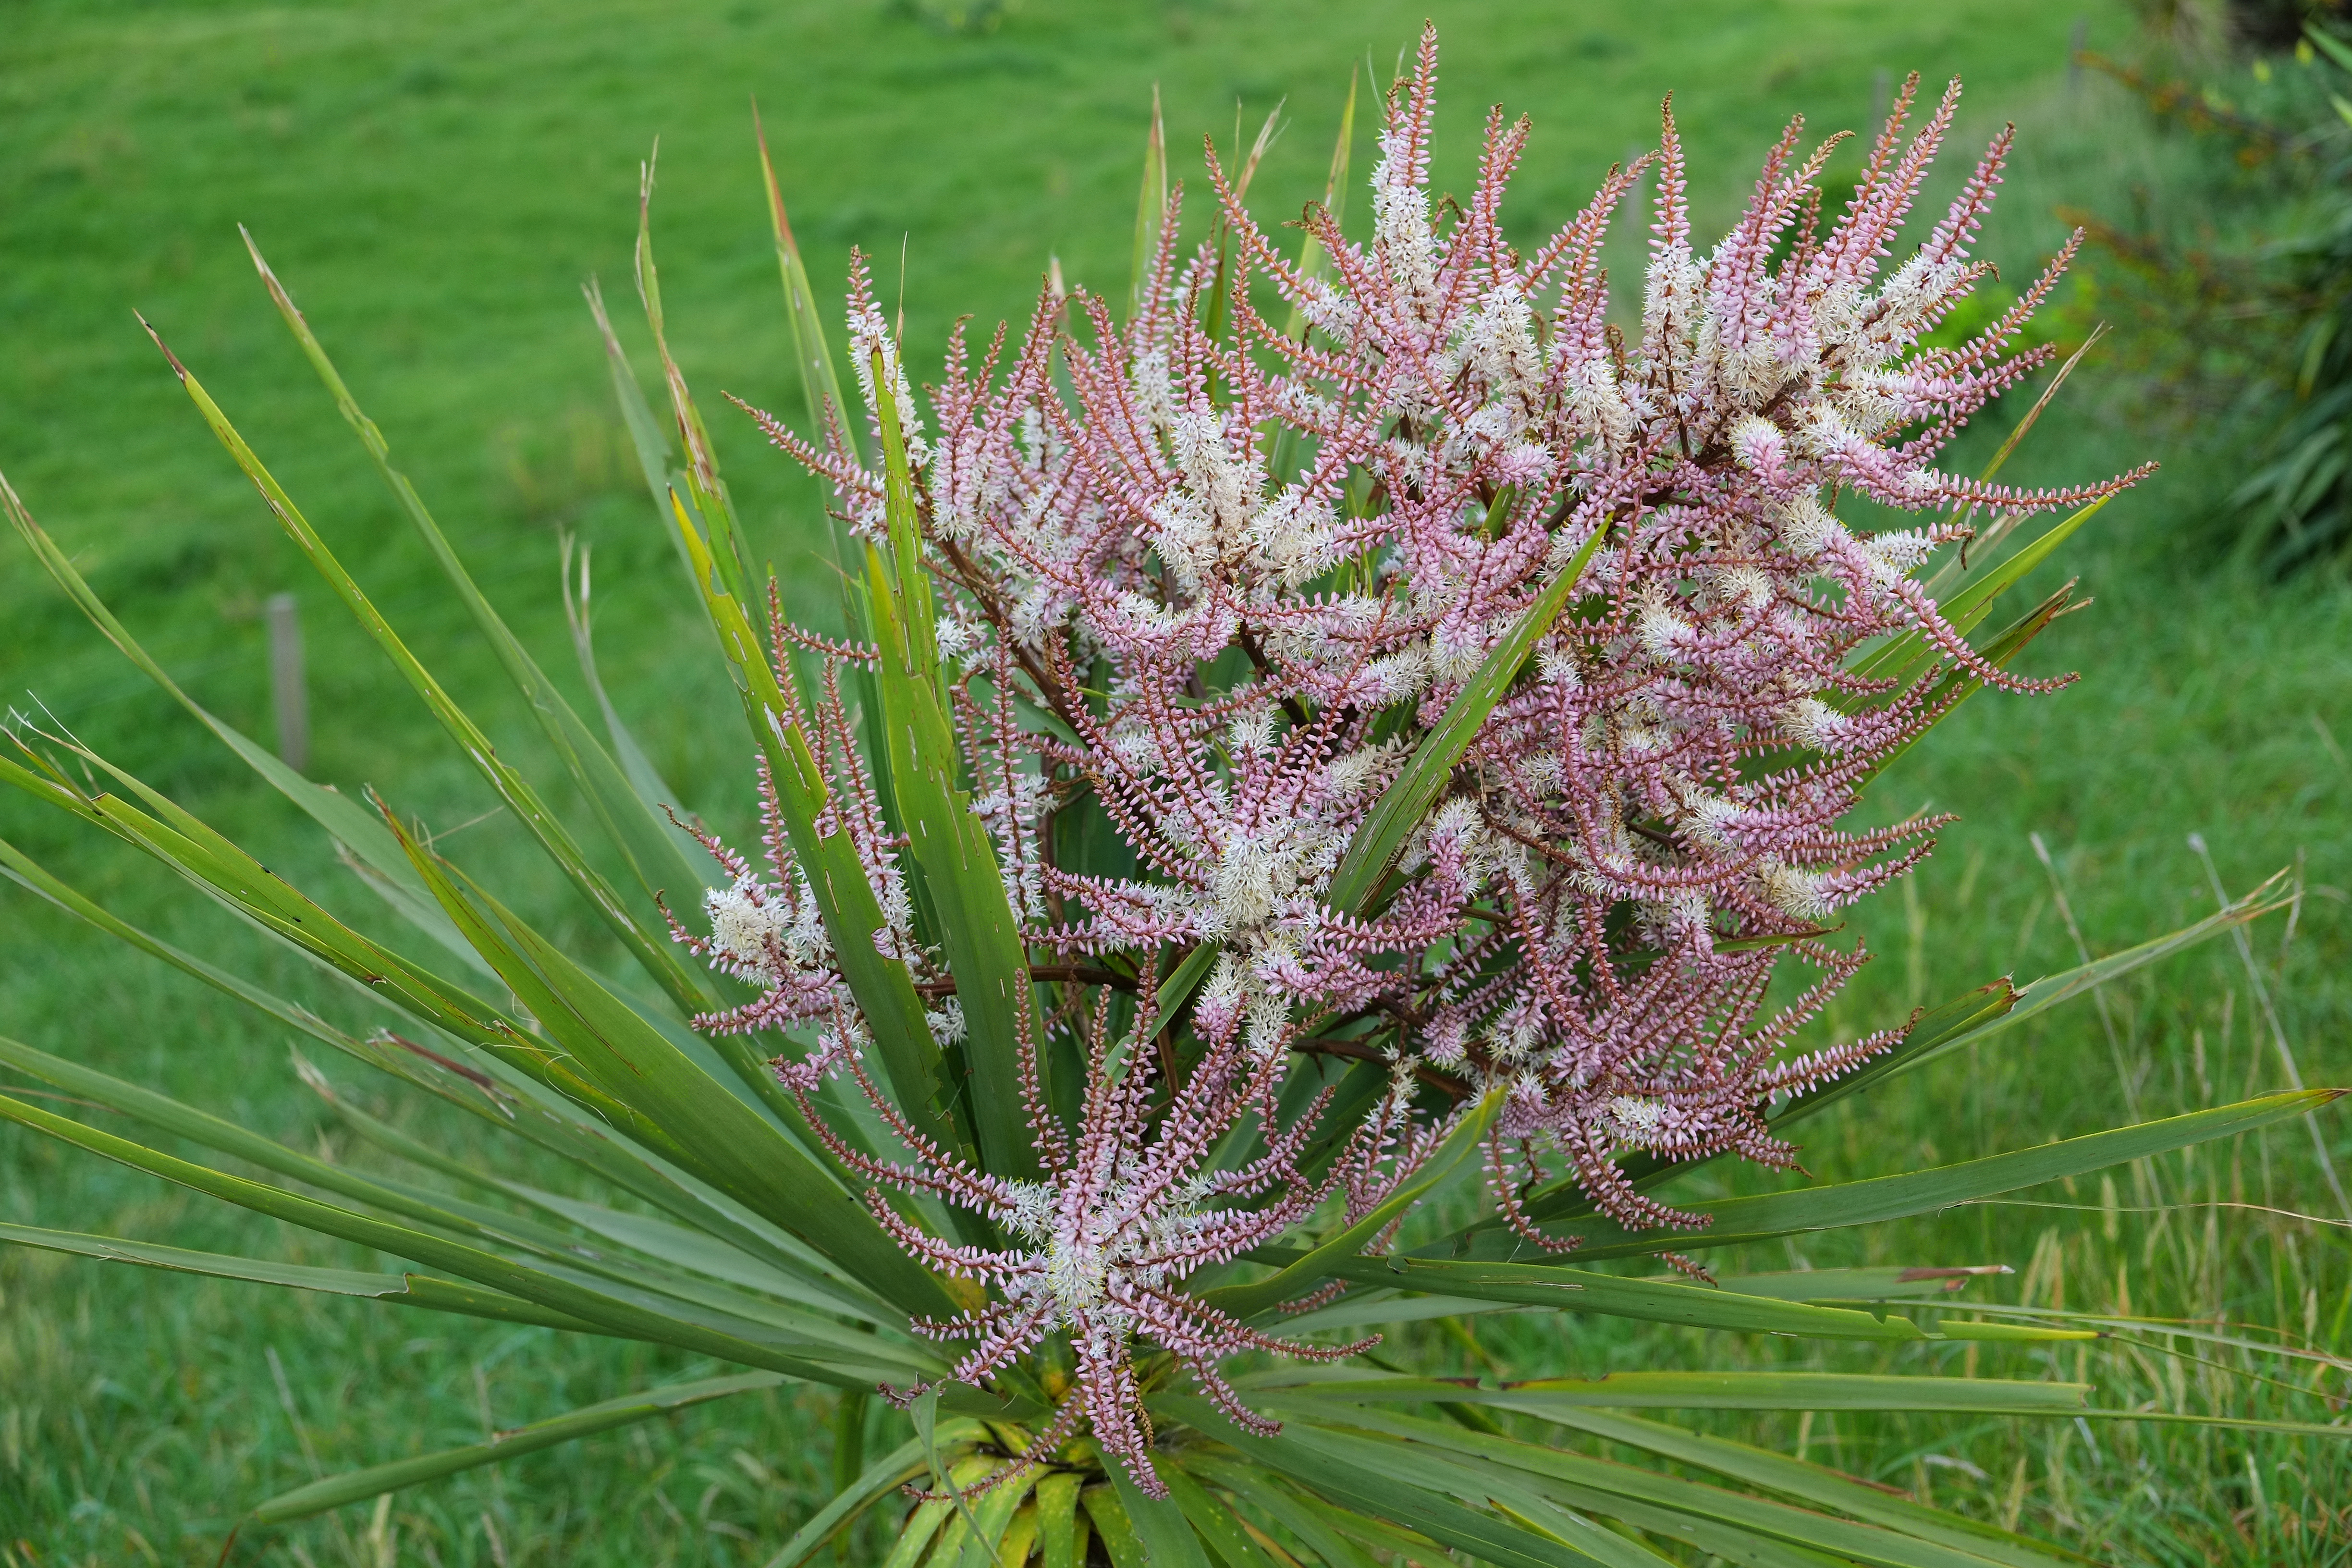 Cabbage tree flower spike with pink bracts